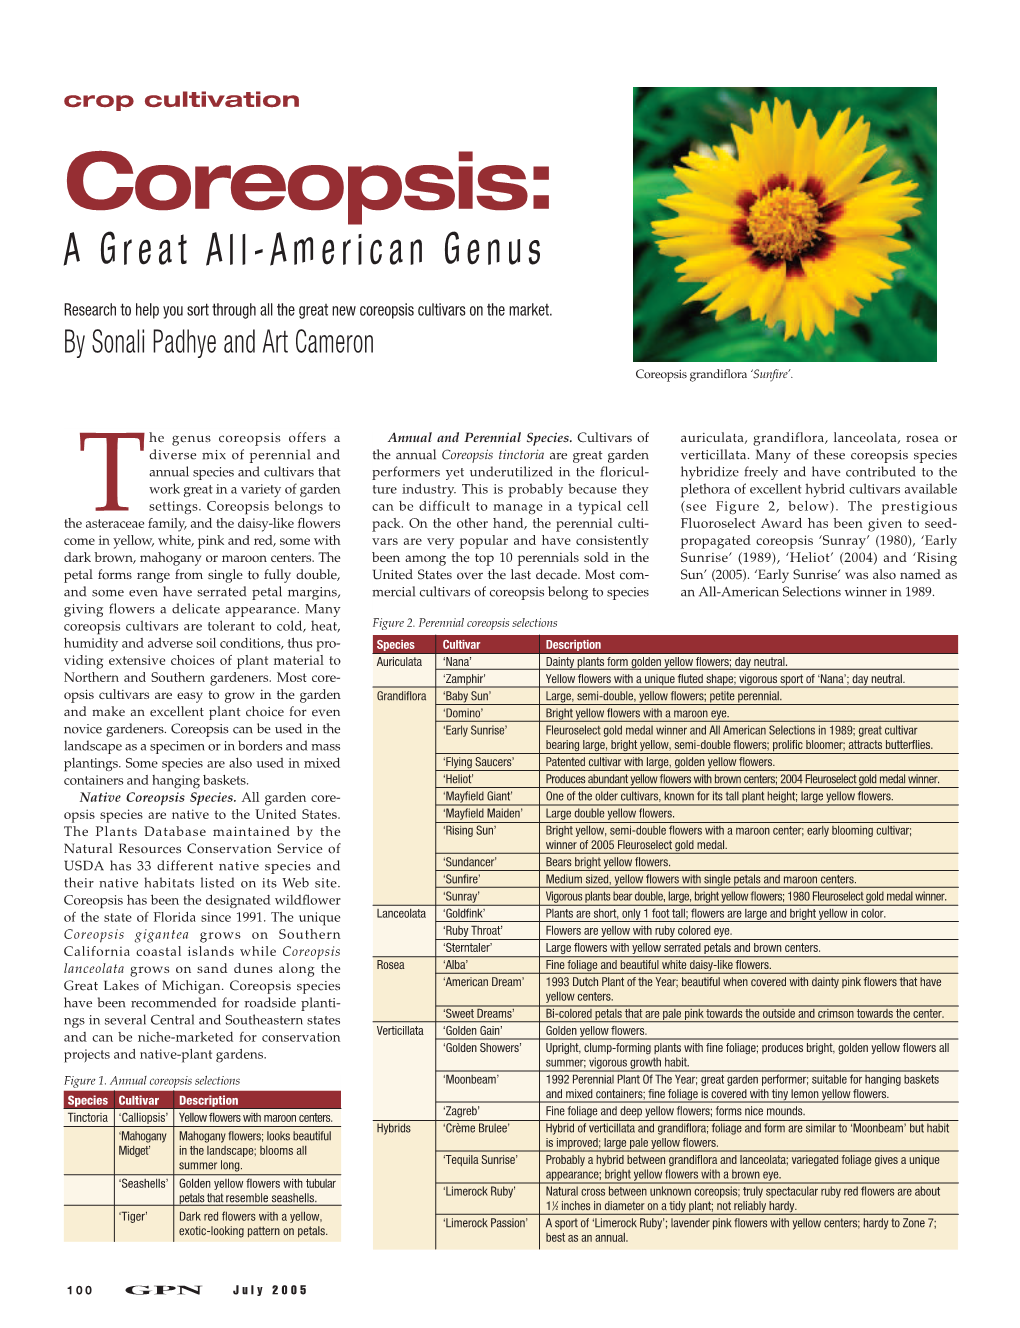 Coreopsis: a Great All-American Genus